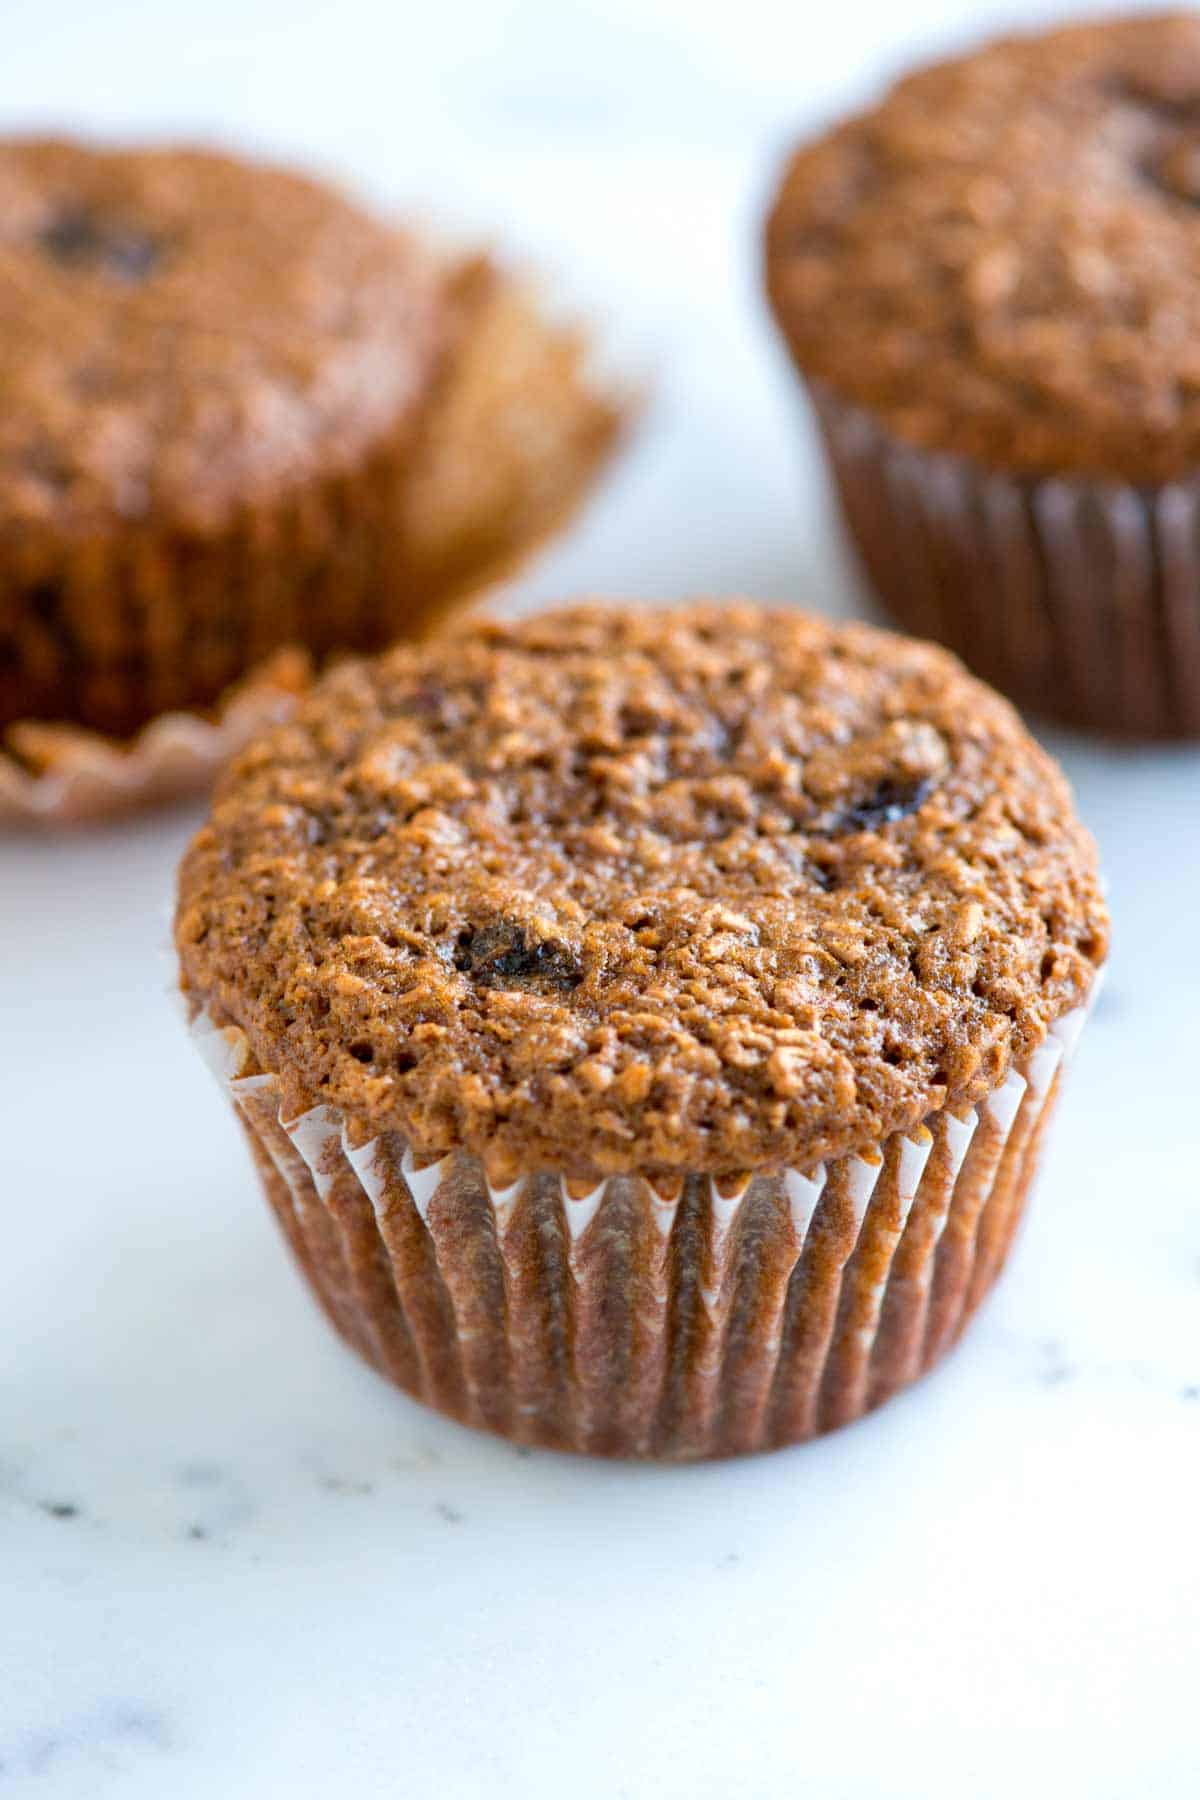 How Many Calories in a Bran Muffin With Raisins 